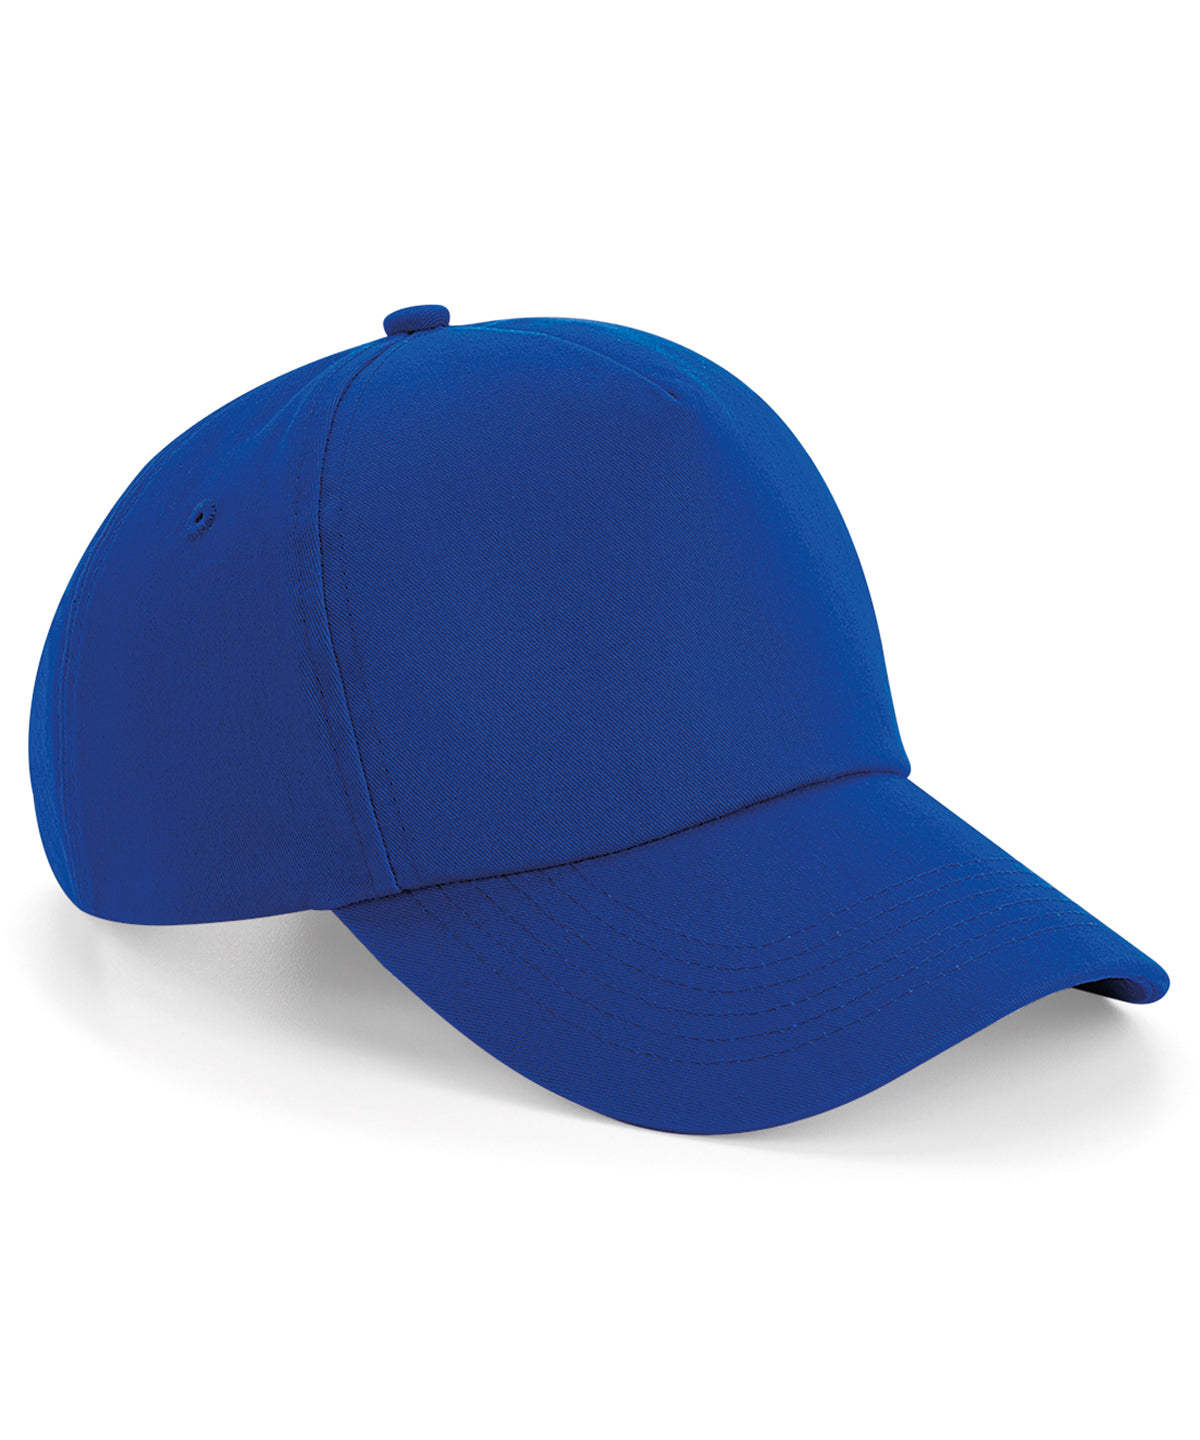 Personalised Caps - Royal Beechfield Authentic 5-panel cap